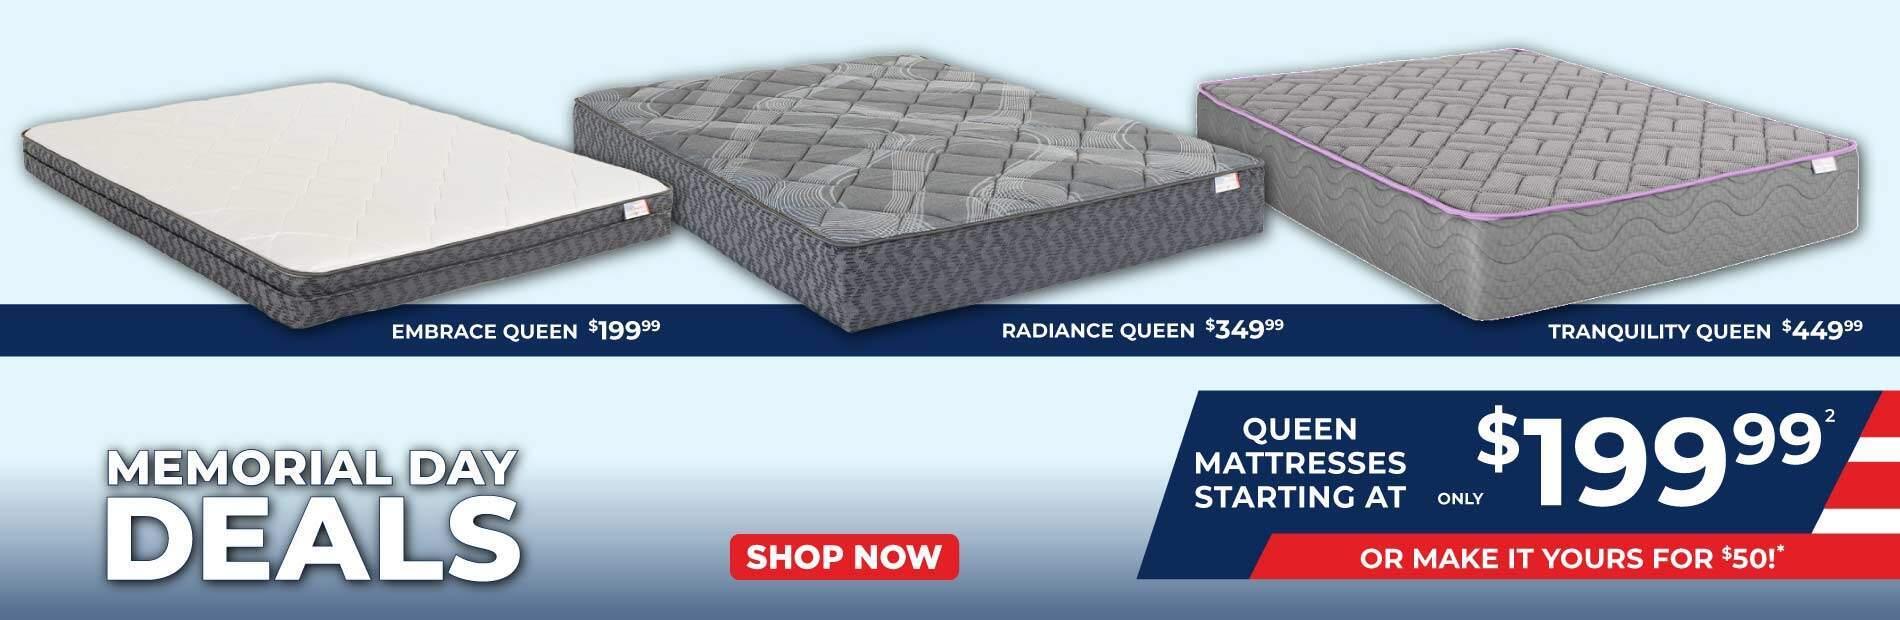 Memorial Day Deals. Embrace queen 199.99. Tranquility queen 449.99. Queen mattresses starting at 199.99. or make it yours for 50.